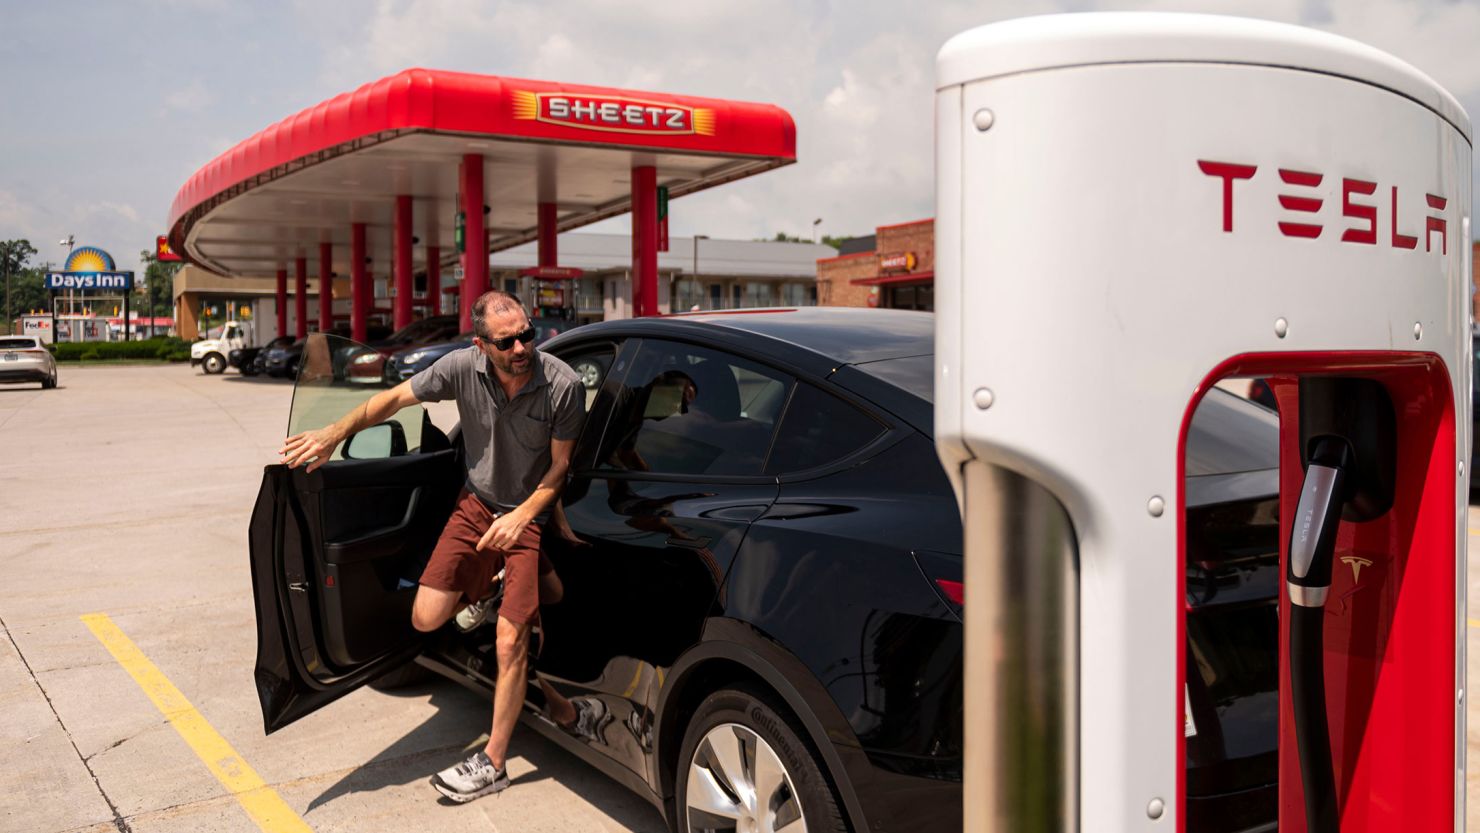 A driver stops to charge a Tesla vehicle at a Sheetz gas station in Breezewood, Pennsylvania, on Thursday, June 16, 2022.